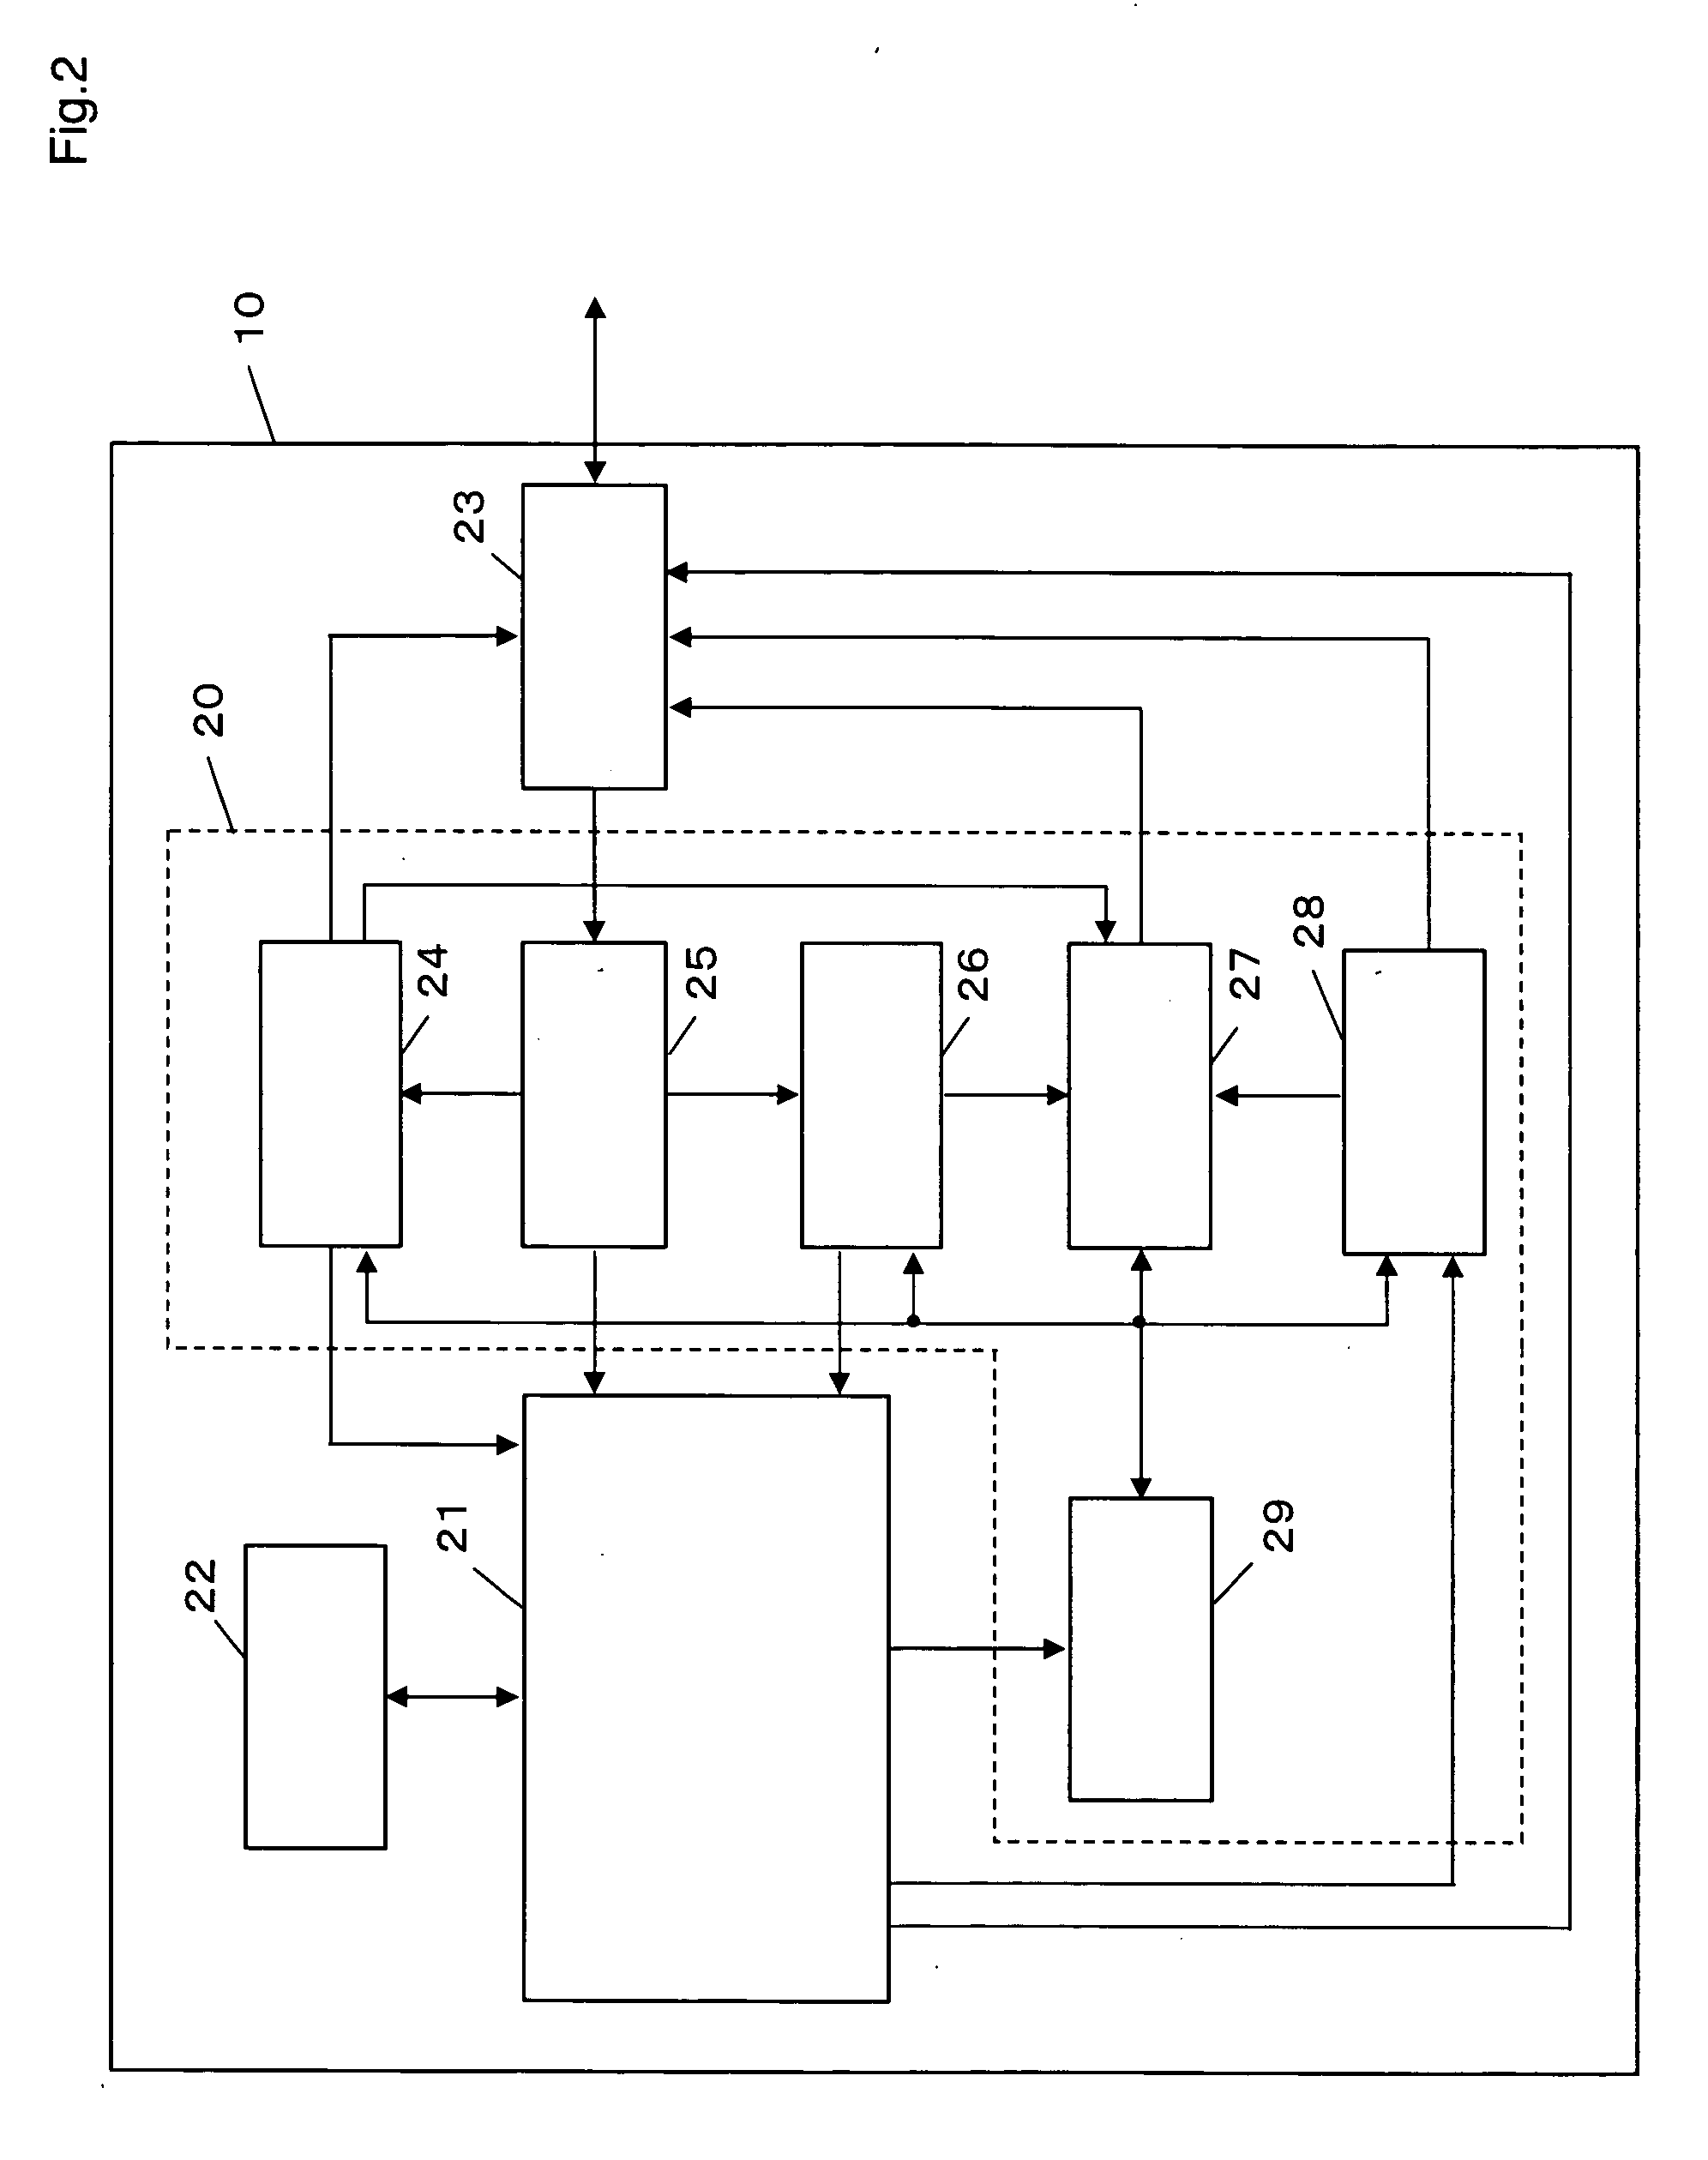 Home agent apparatus, mobile router communication system, and communication method